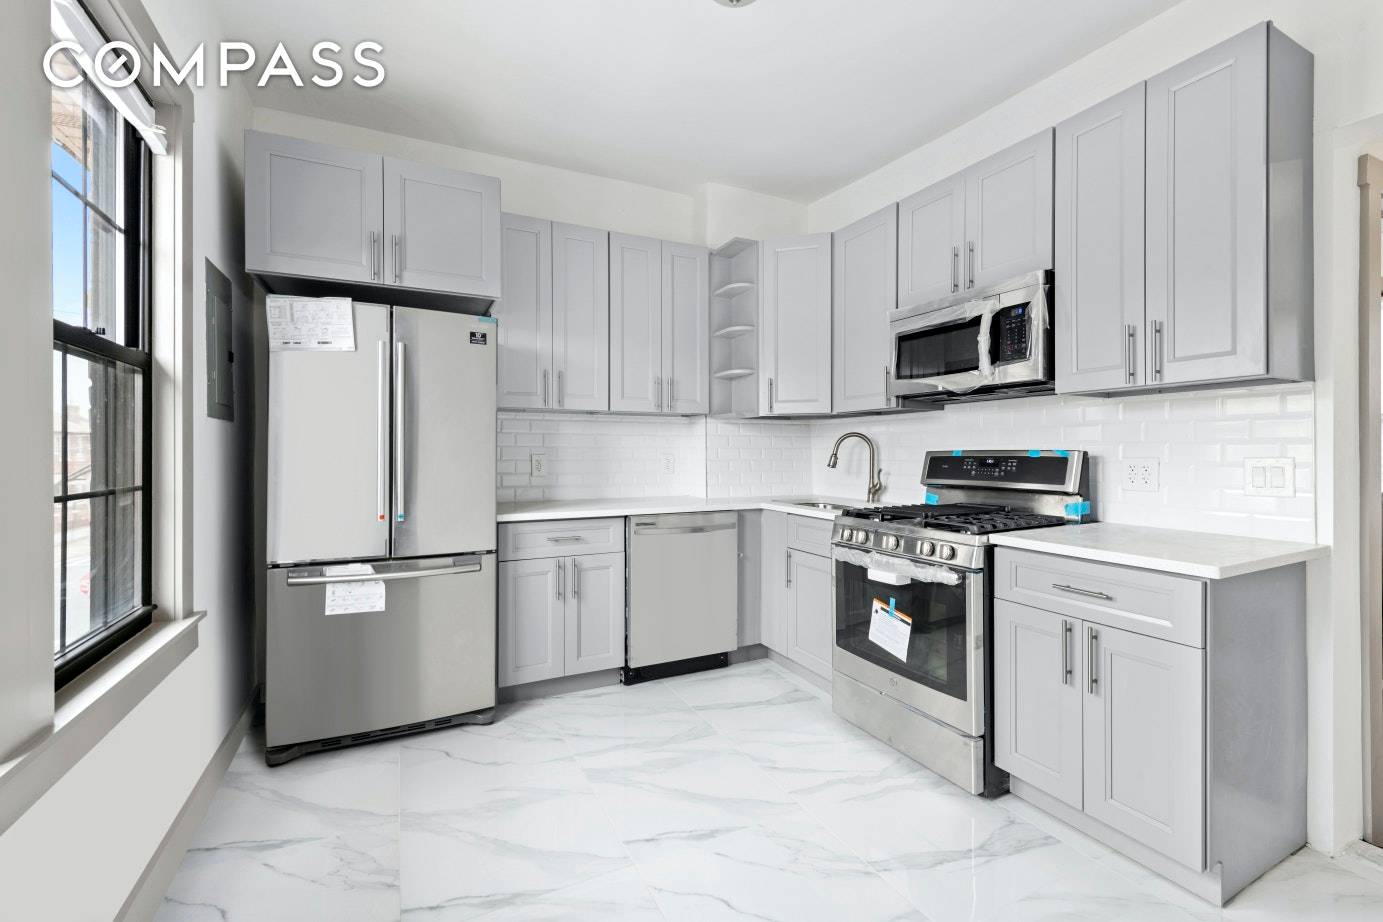 A beautifully and tastefully renovated two family home ideally located near transportation and shopping in East Flatbush.